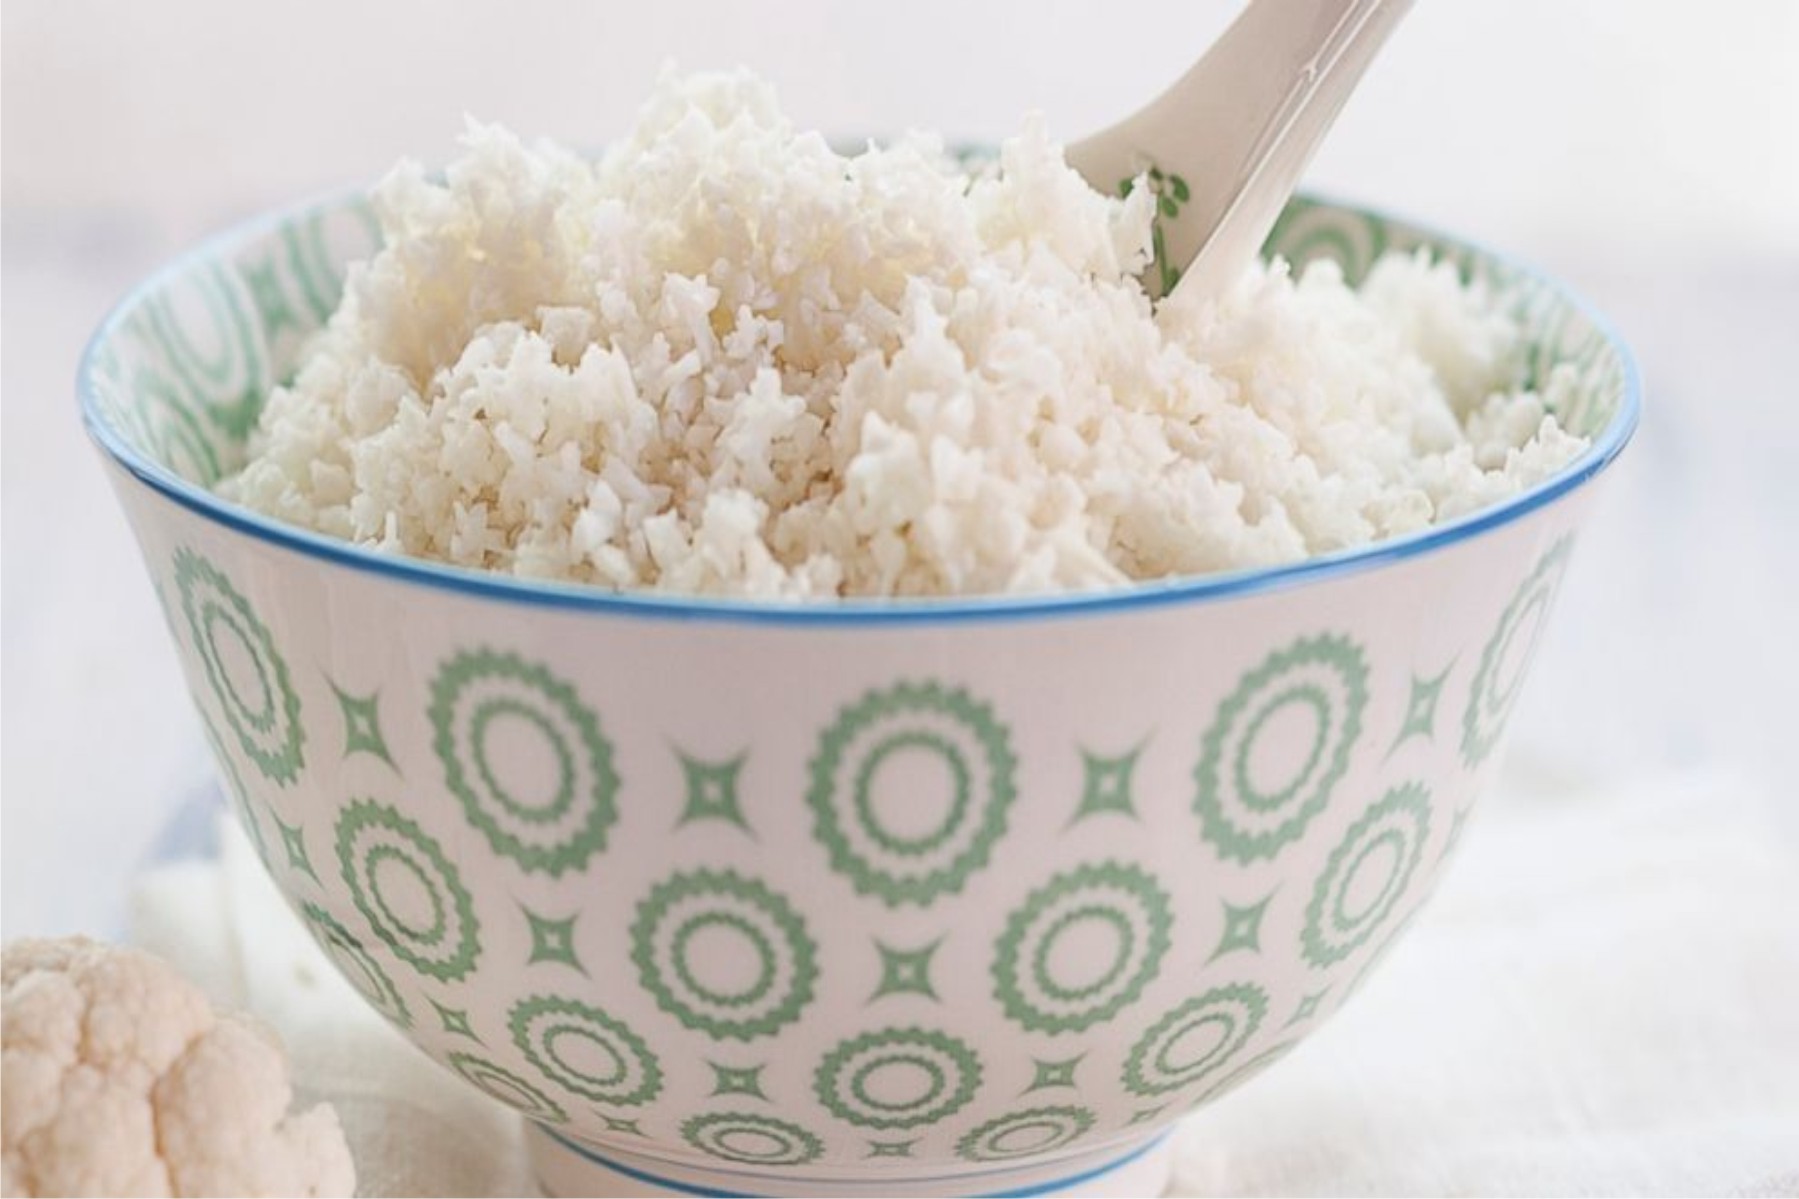 Scientists have discovered a simple way to cook rice that dramatically cuts the calories